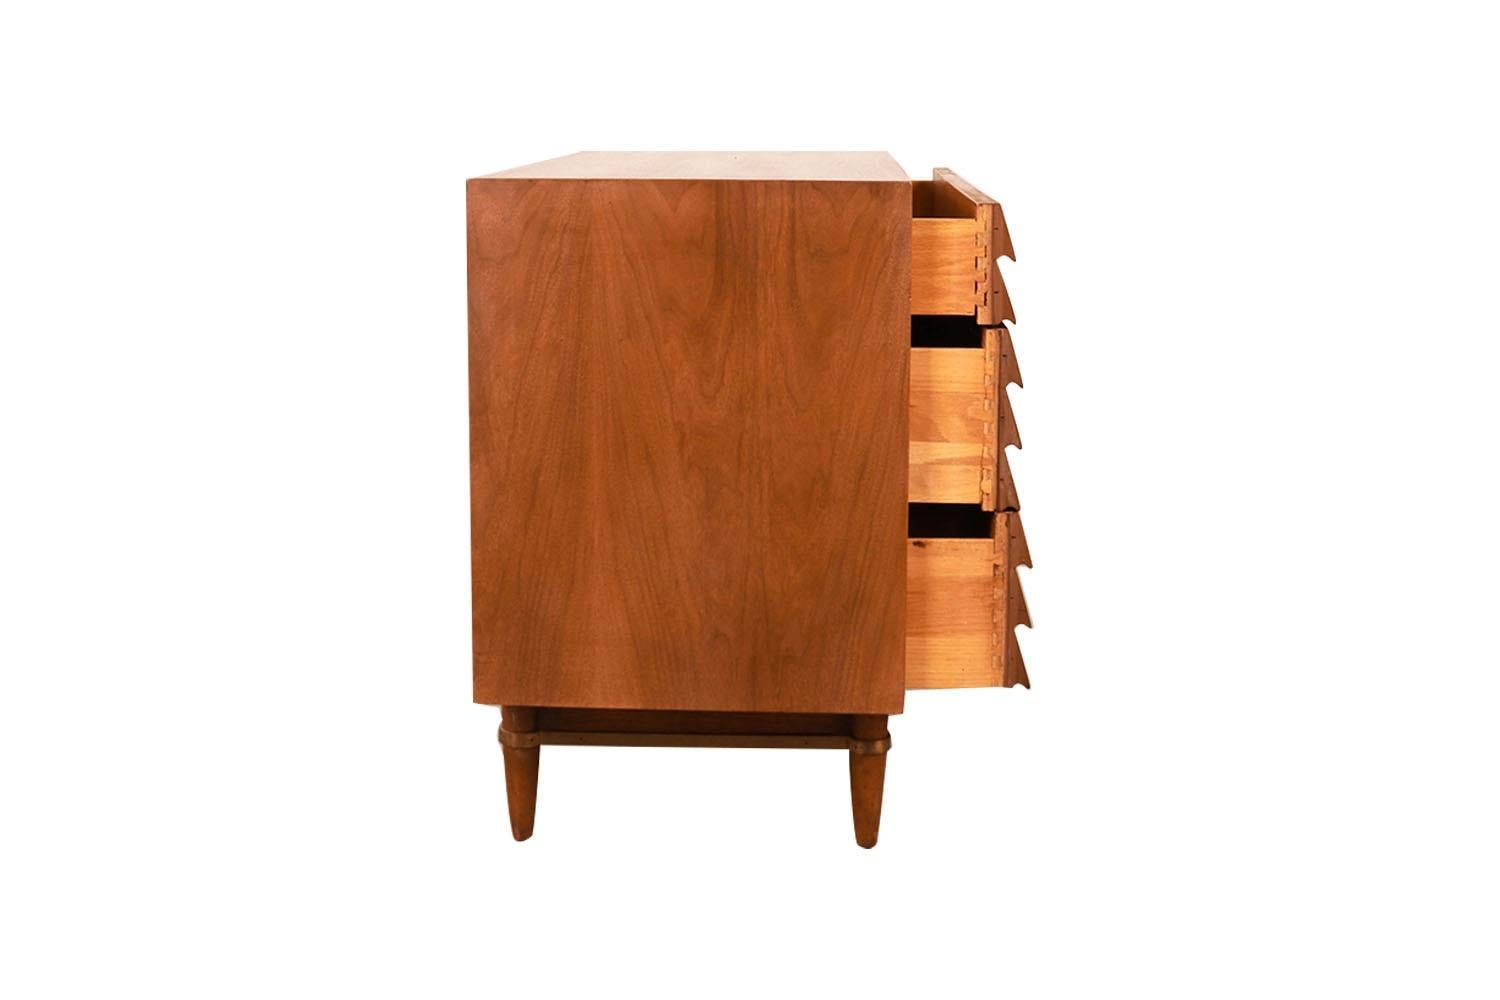 Beautifully detailed & proportioned walnut American of Martinsville bachelors chest/dresser. Designed by Merton Gershun for American of Martinsville’s “Dania” line, one of the most esteemed furniture producers of the Mid-century era. Featuring a